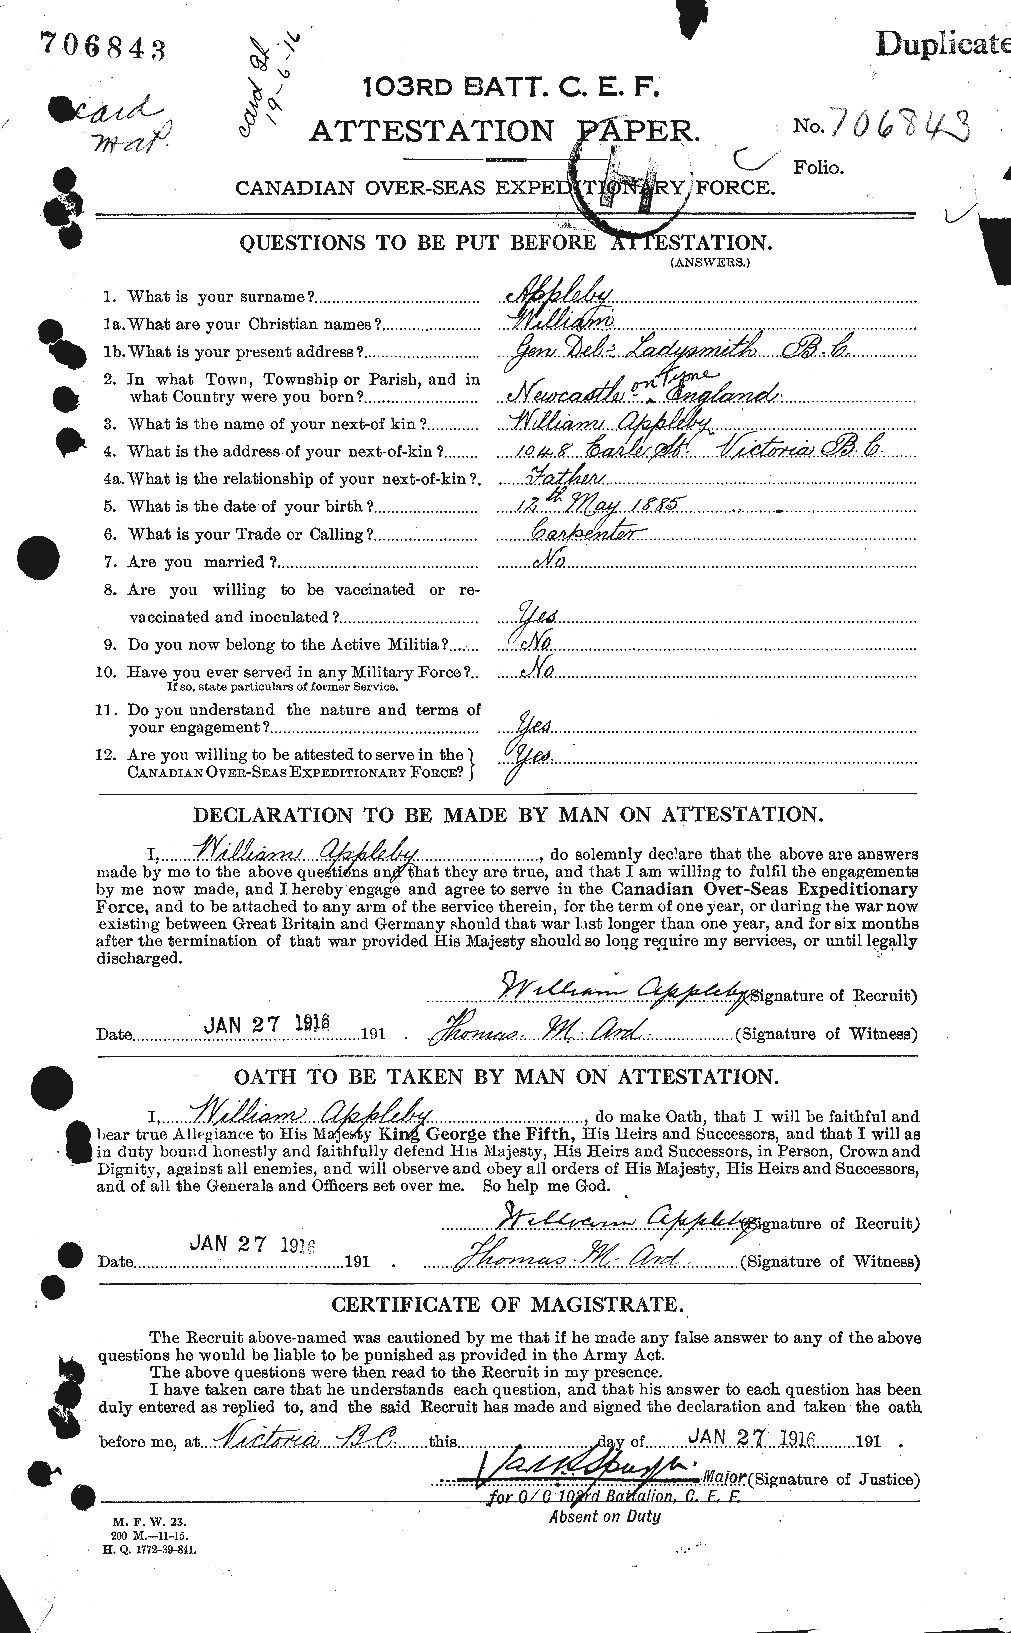 Personnel Records of the First World War - CEF 211315a